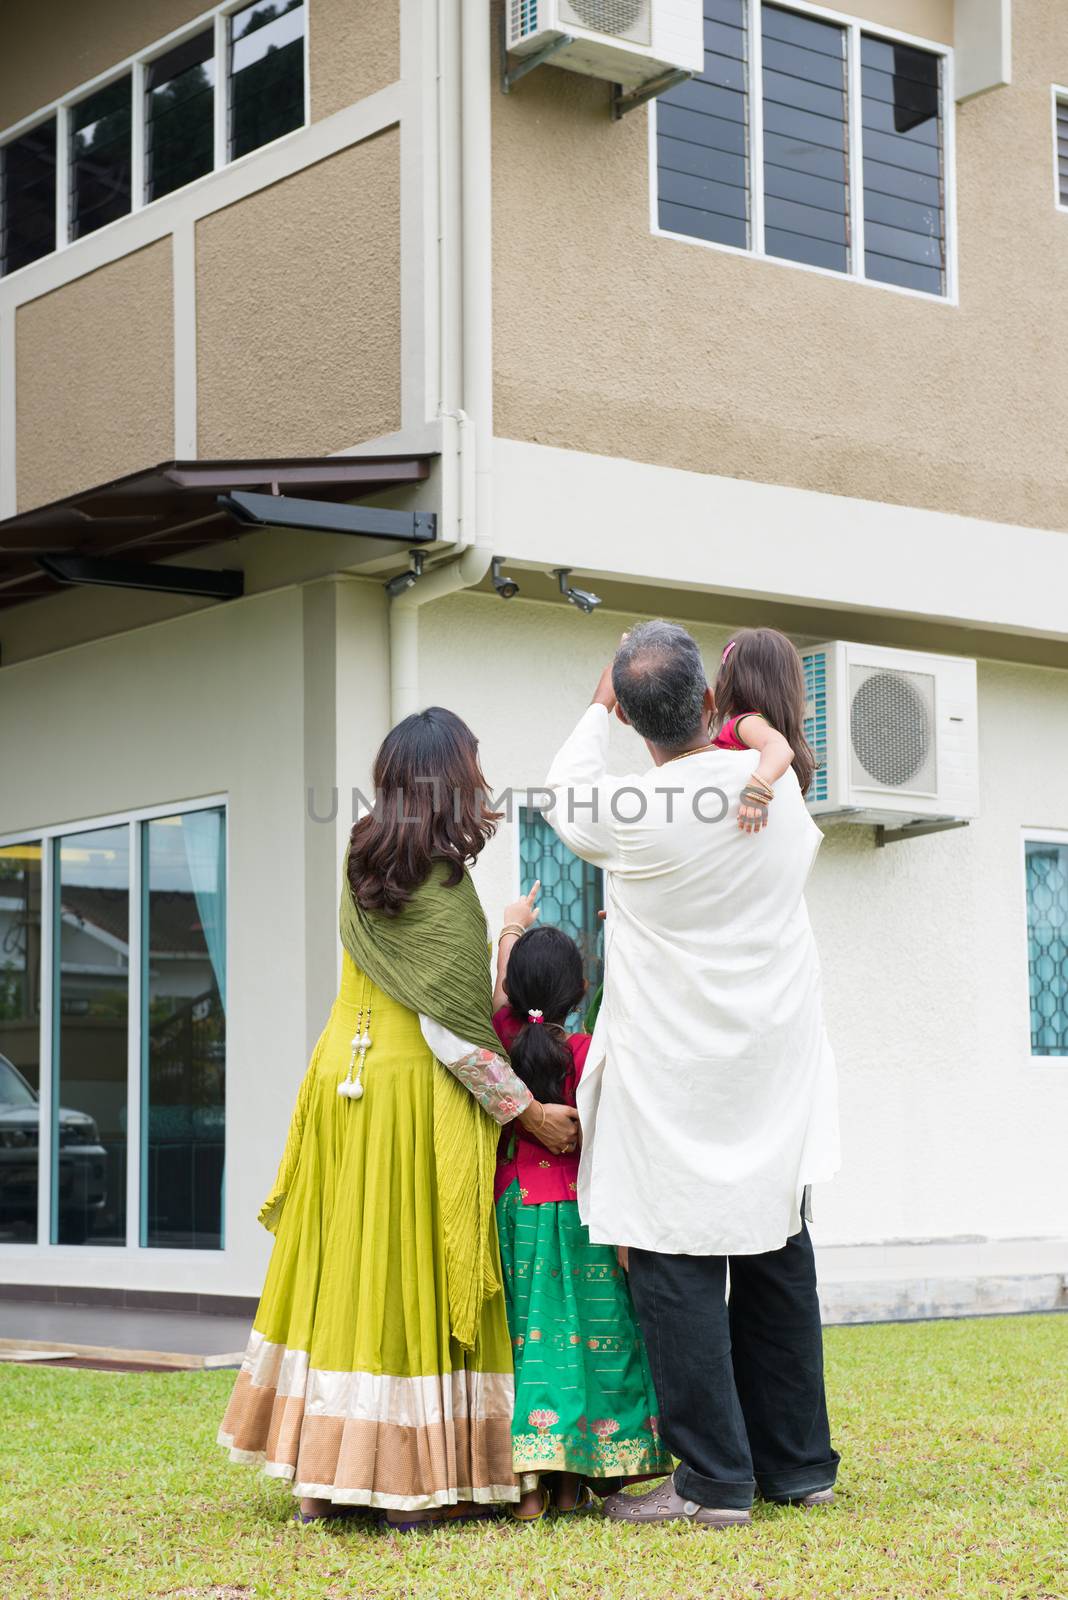 Rear view of Indian family in traditional dress saree standing outdoors and pointing to their new home.